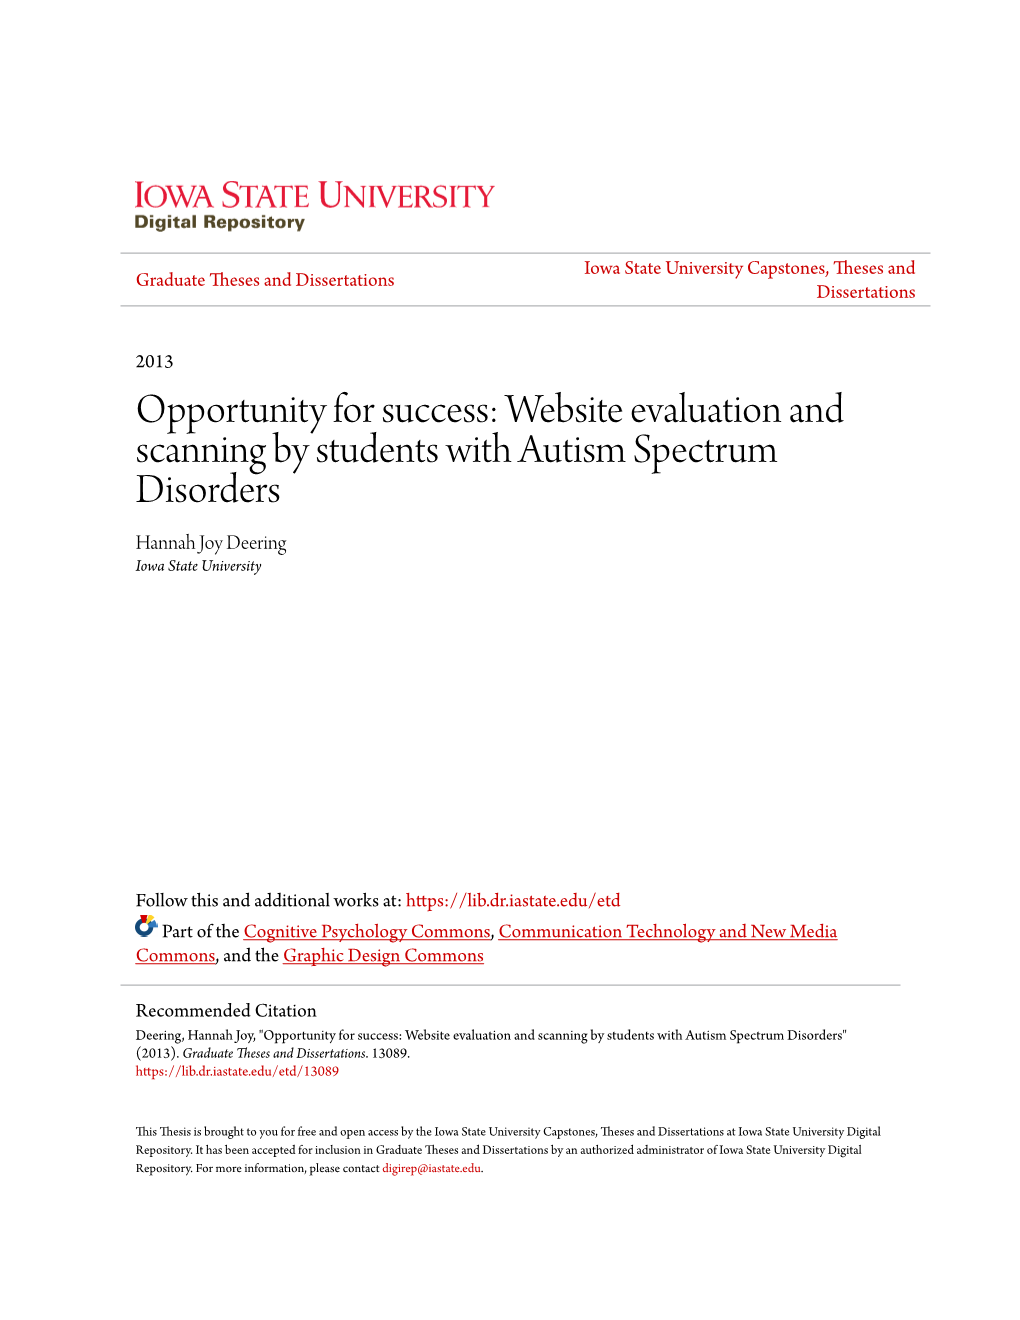 Website Evaluation and Scanning by Students with Autism Spectrum Disorders Hannah Joy Deering Iowa State University